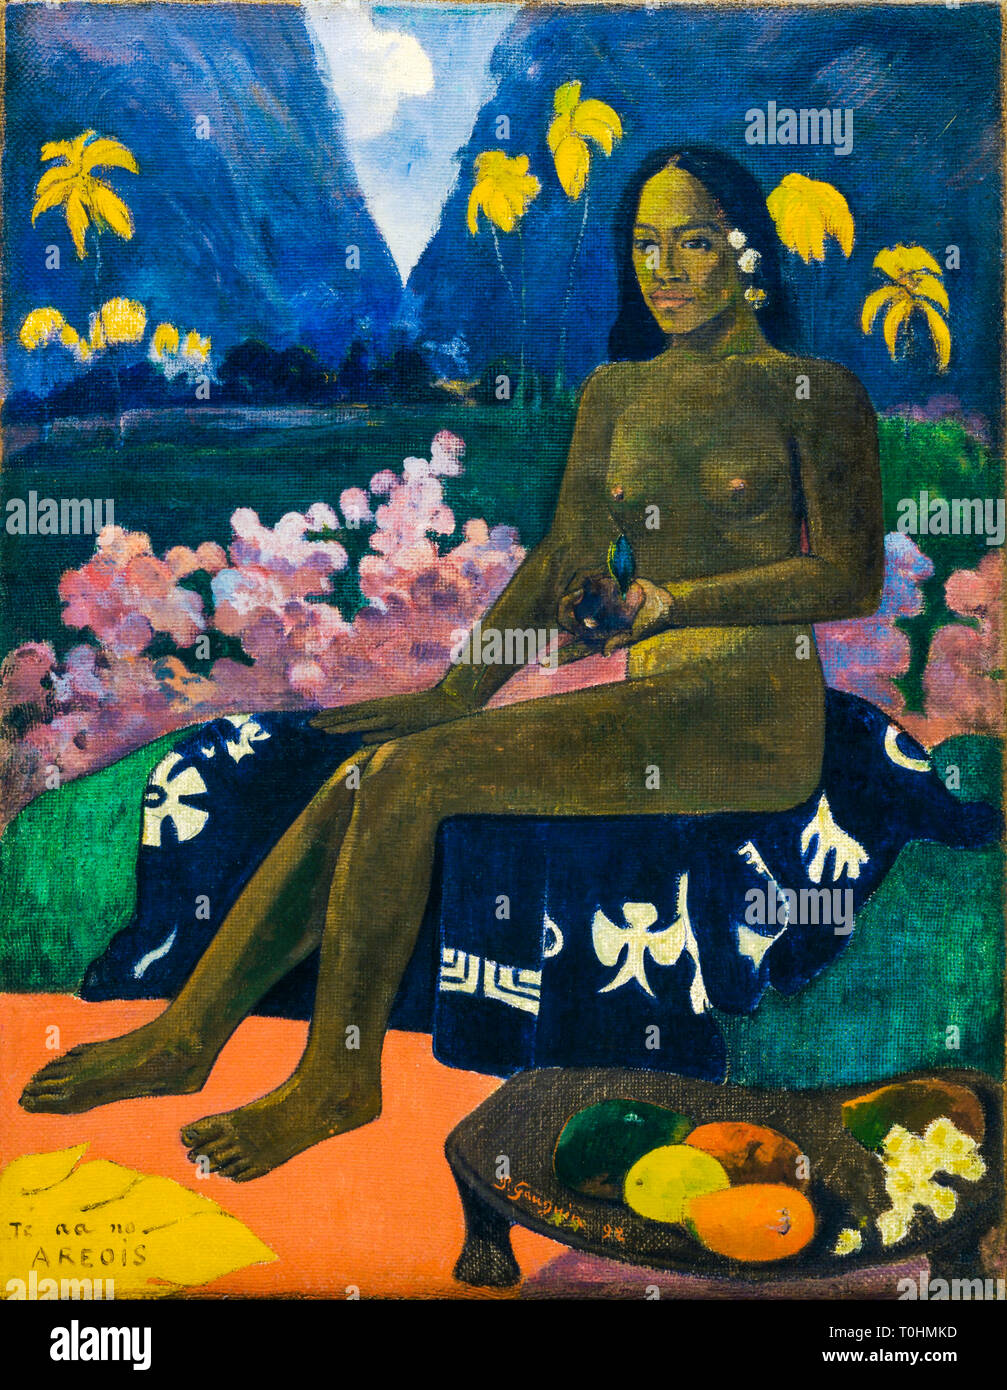 Paul Gauguin, The Seed of the Areoi, portrait painting, 1892 Stock Photo